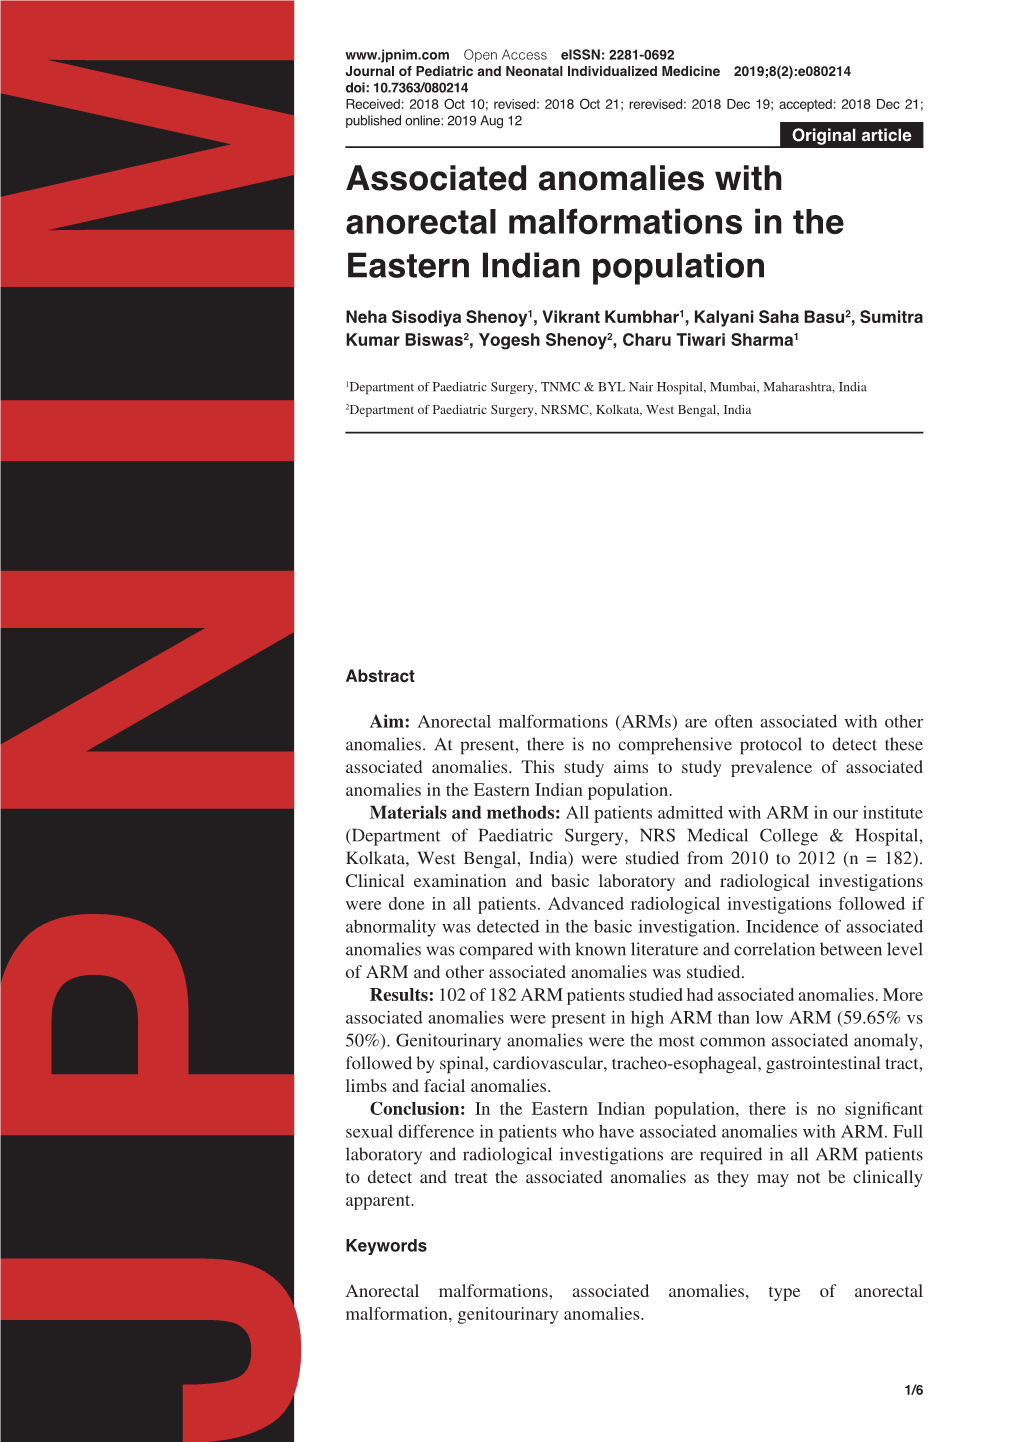 Associated Anomalies with Anorectal Malformations in the Eastern Indian Population